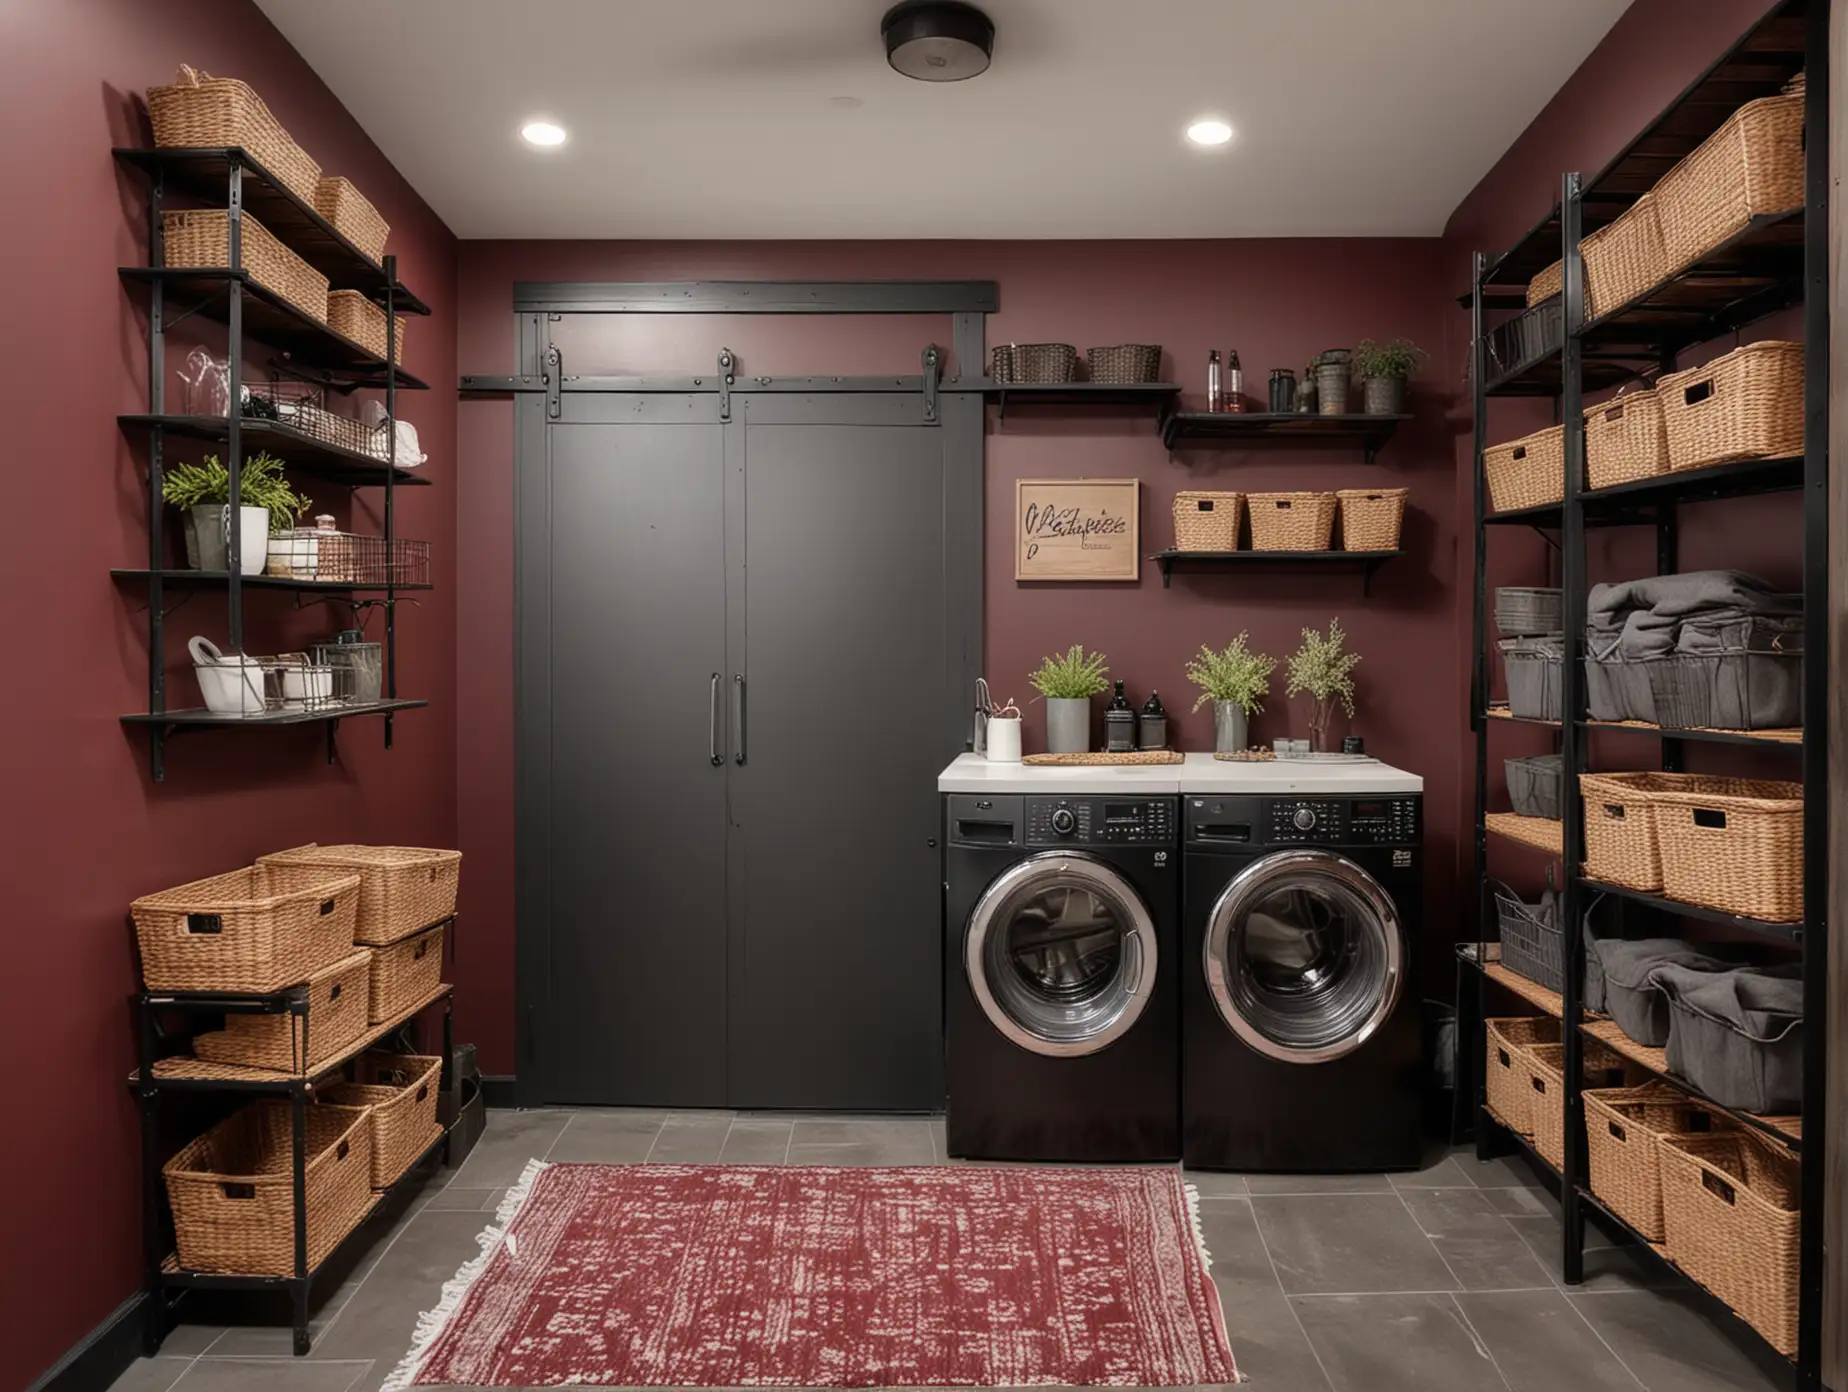 Generate a wide shot of a modern laundry room with burgundy accent walls, industrial metal shelving, wicker baskets for laundry storage, and a rolling barn door with a sleek black finish.